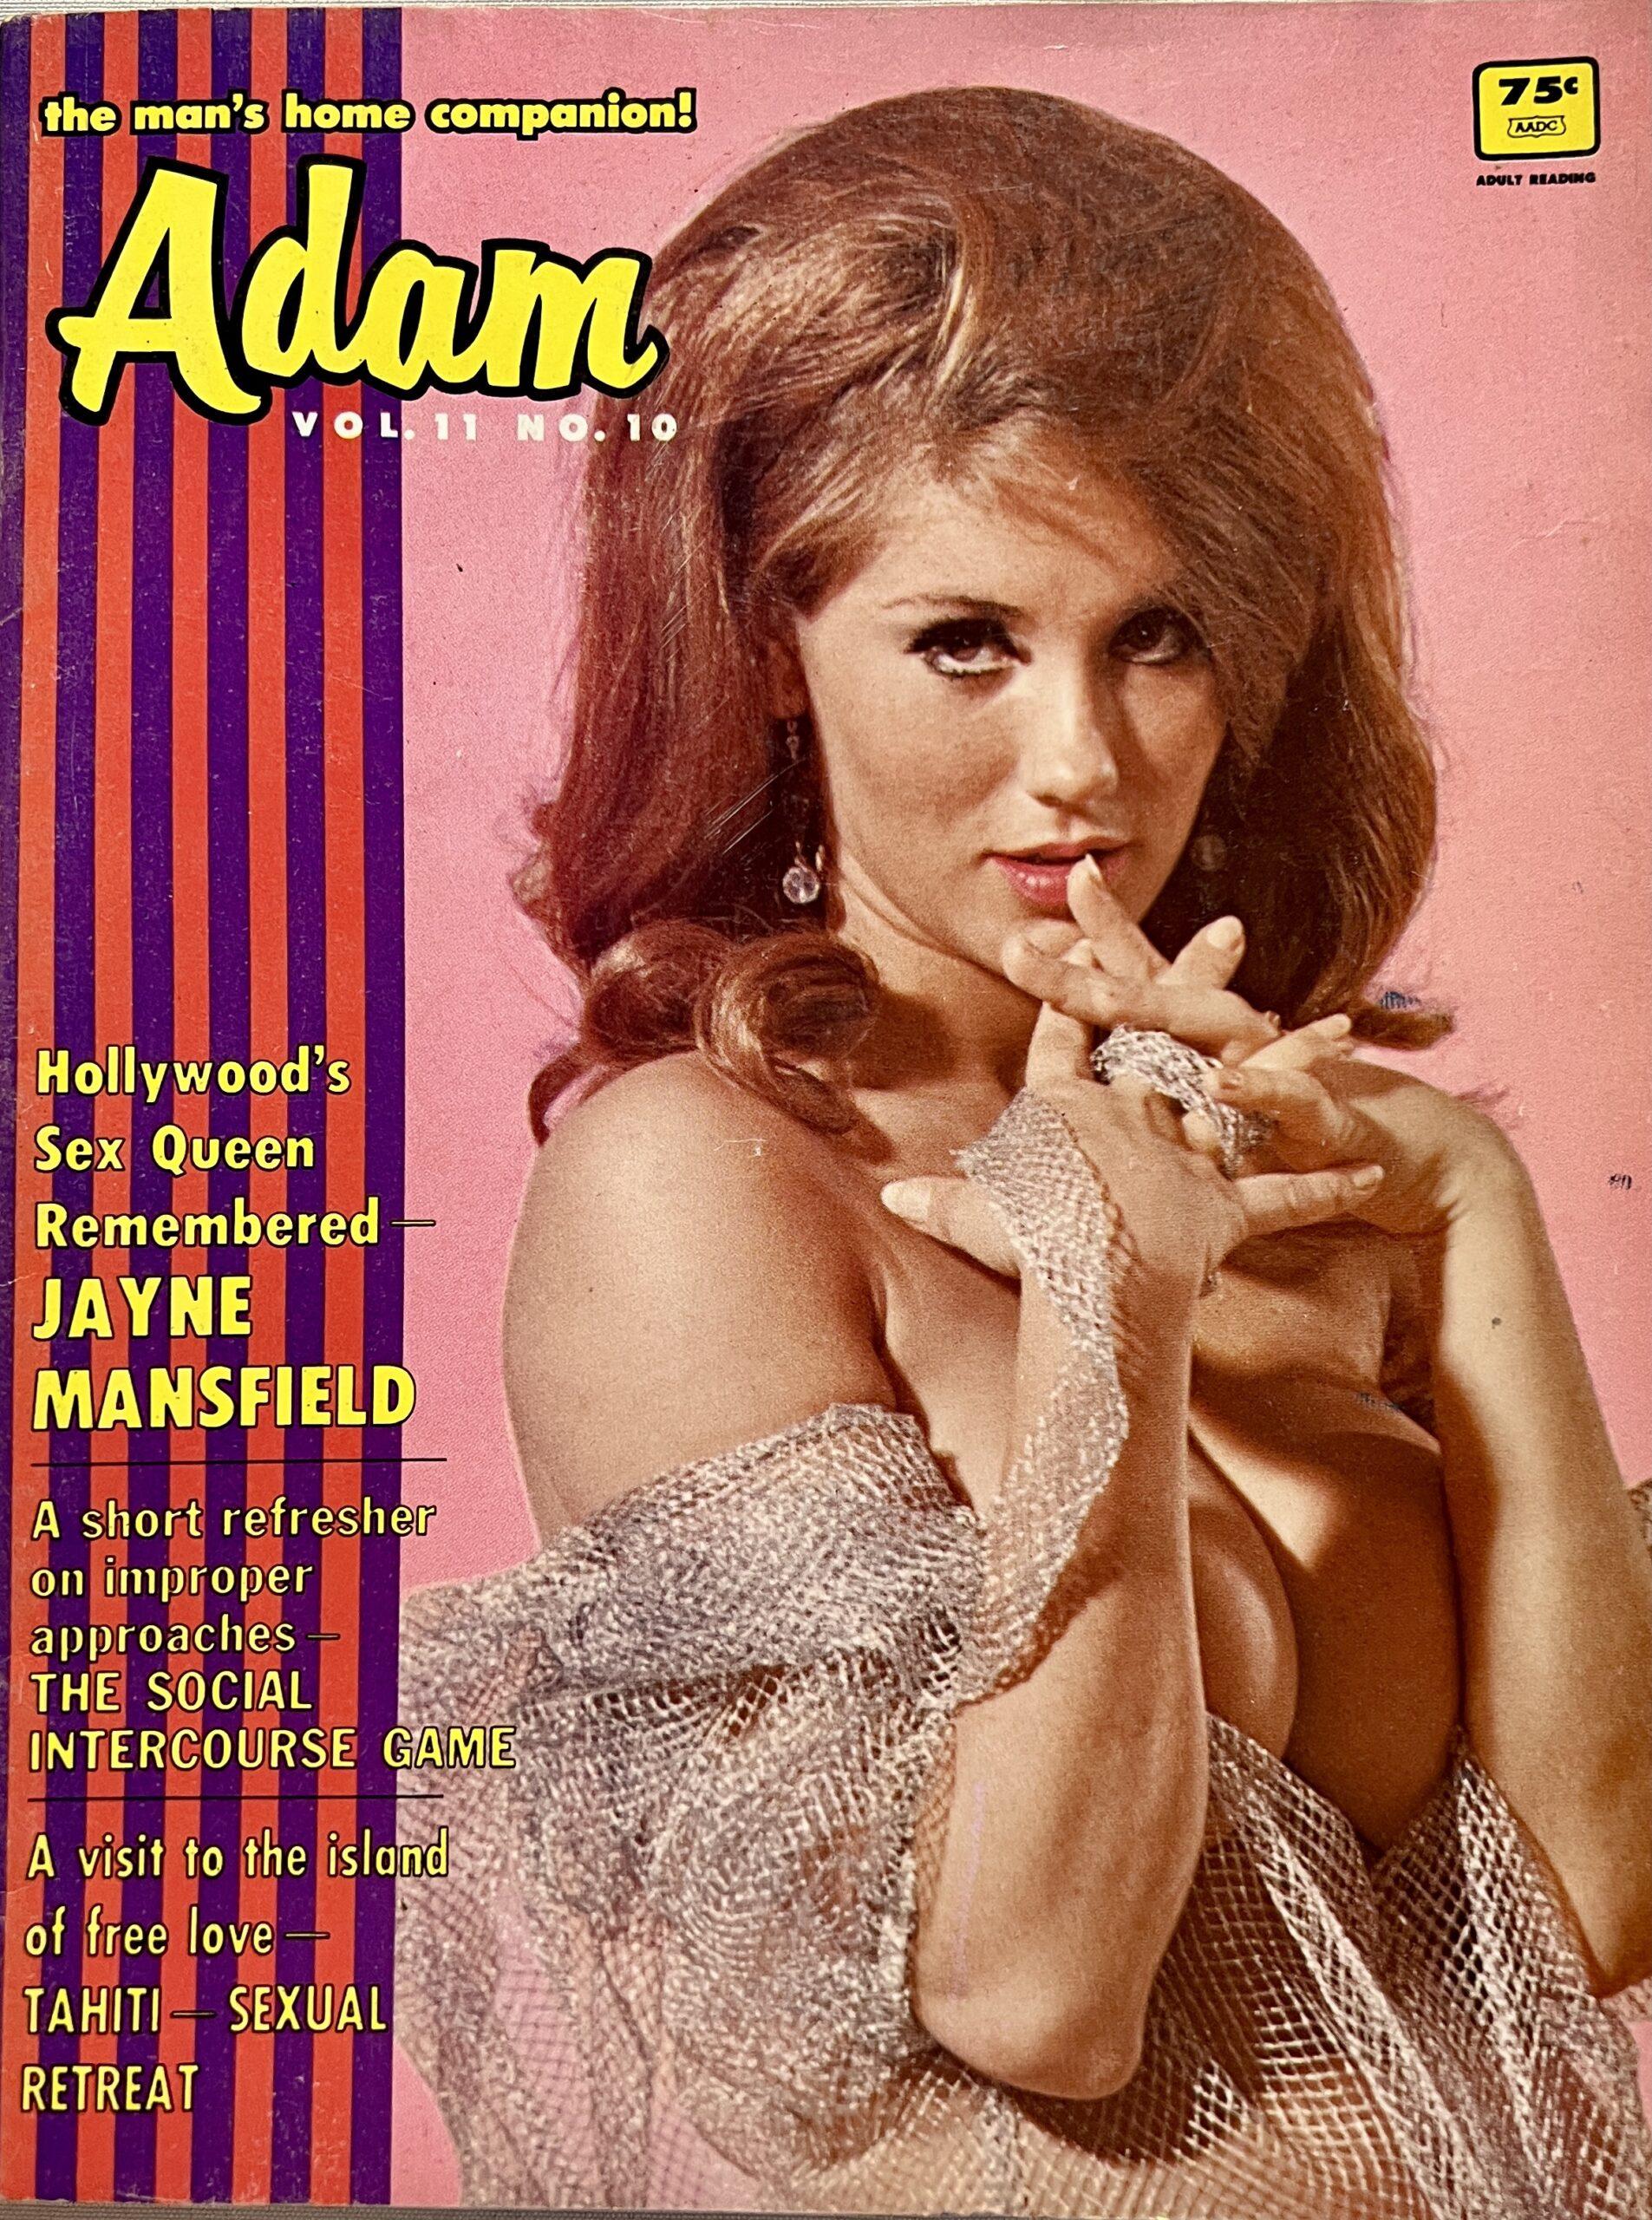 Adam 11/10 October 1967 Adult Swingers and Personals picture photo